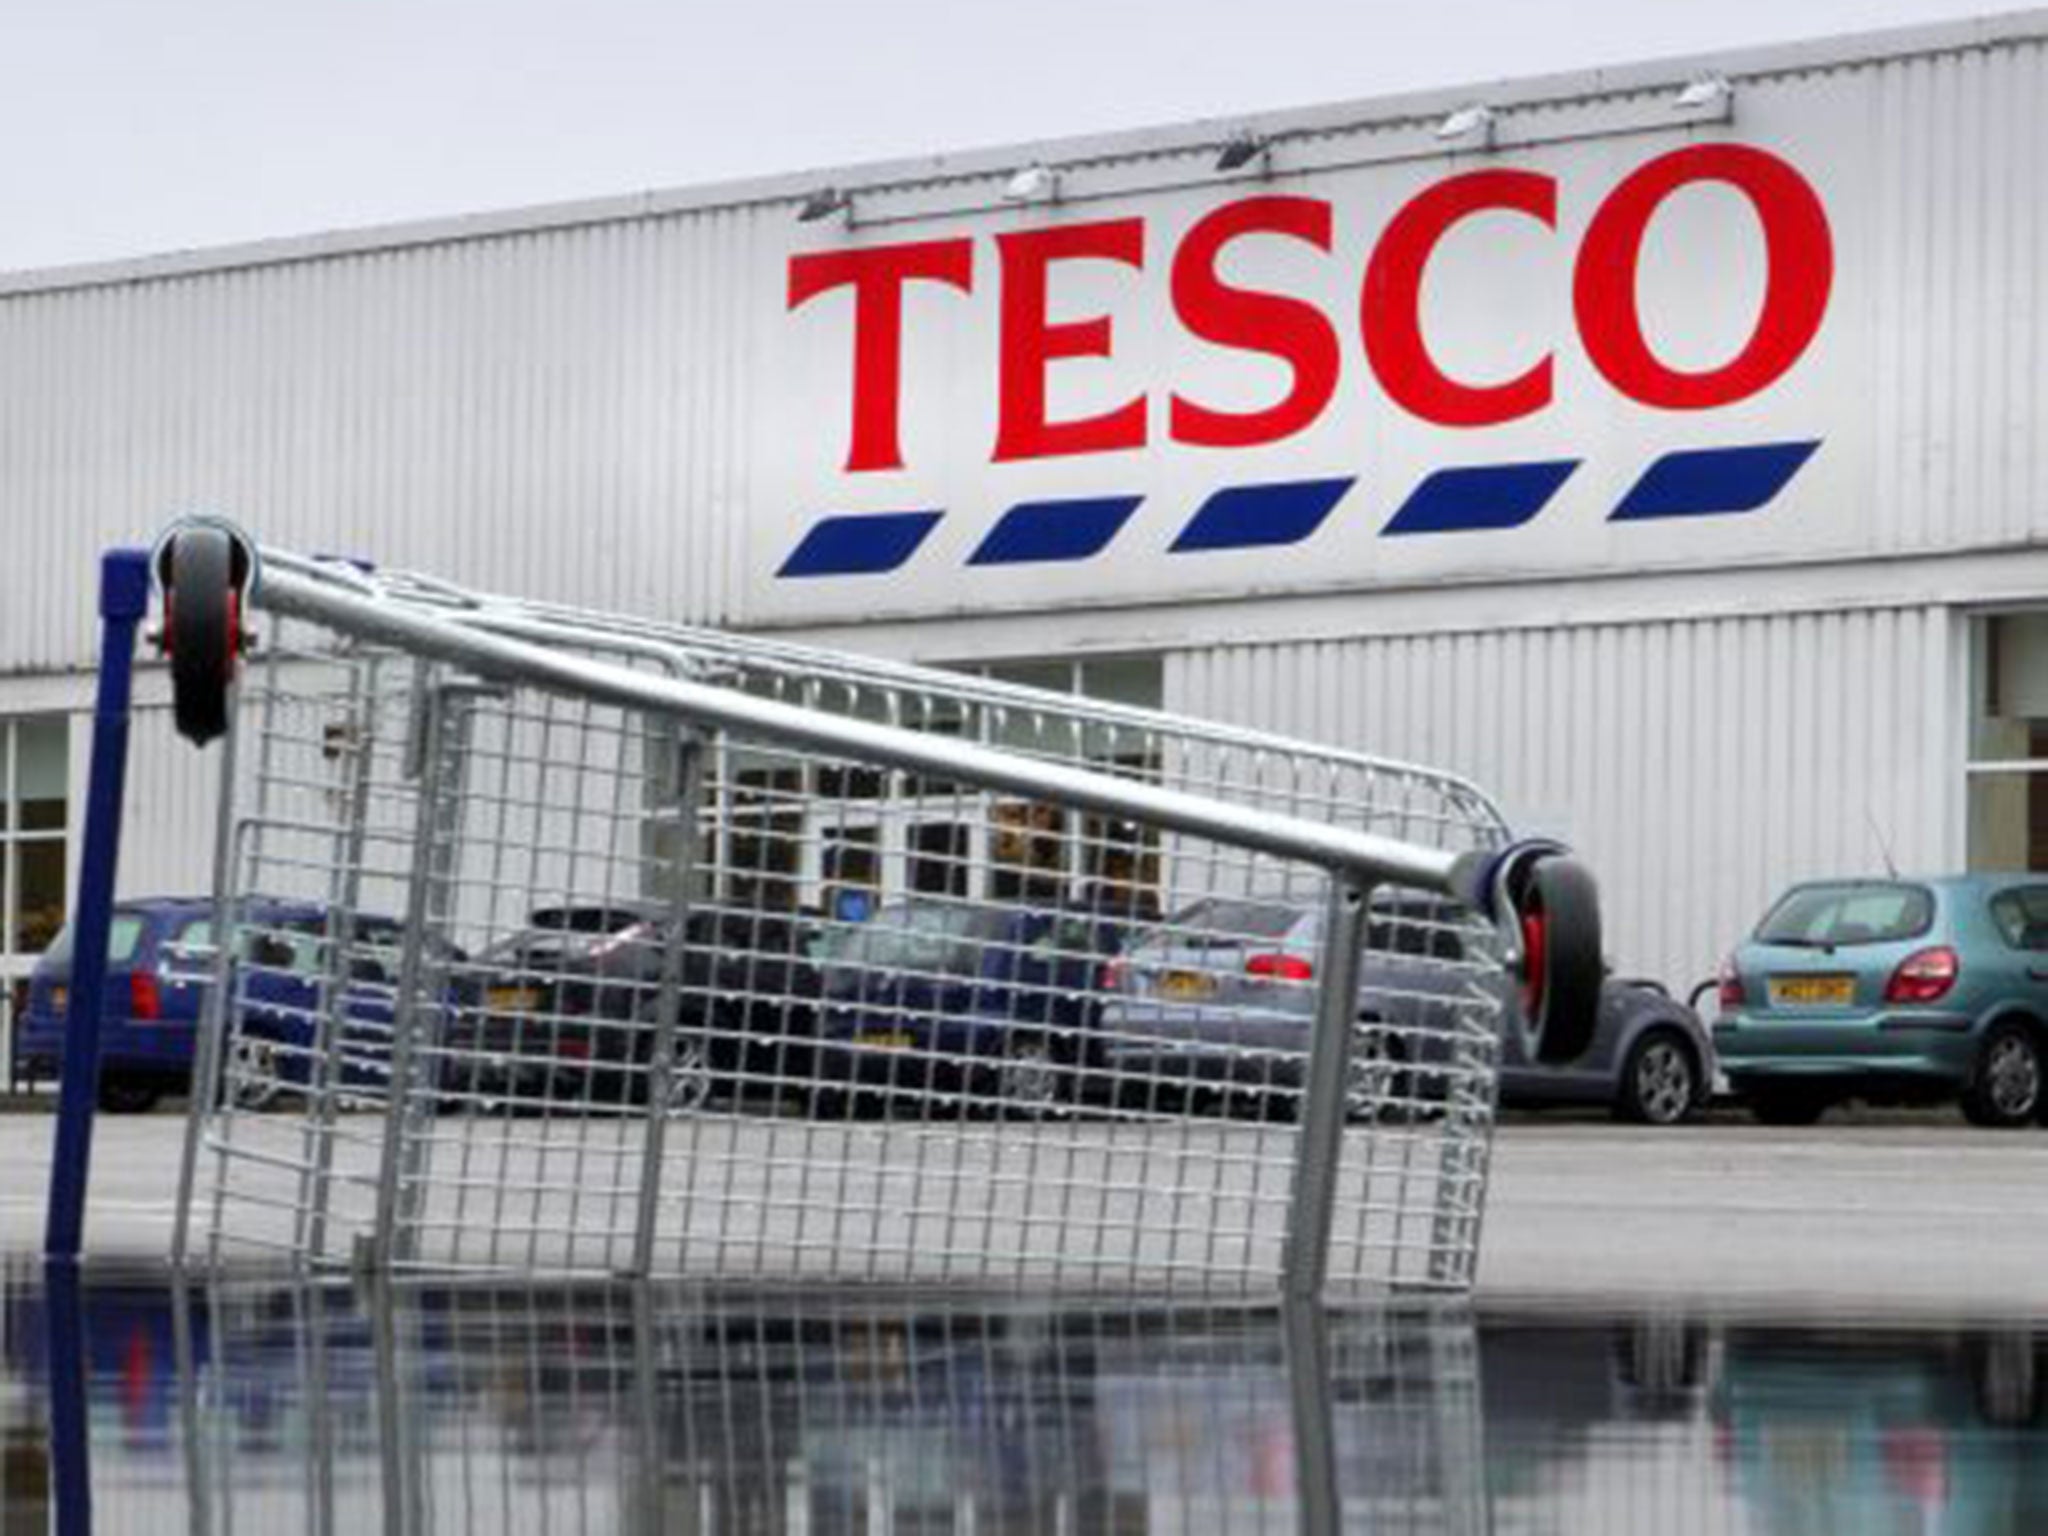 Tesco must adapt or go under, but it’s hard for a super-tanker to change course